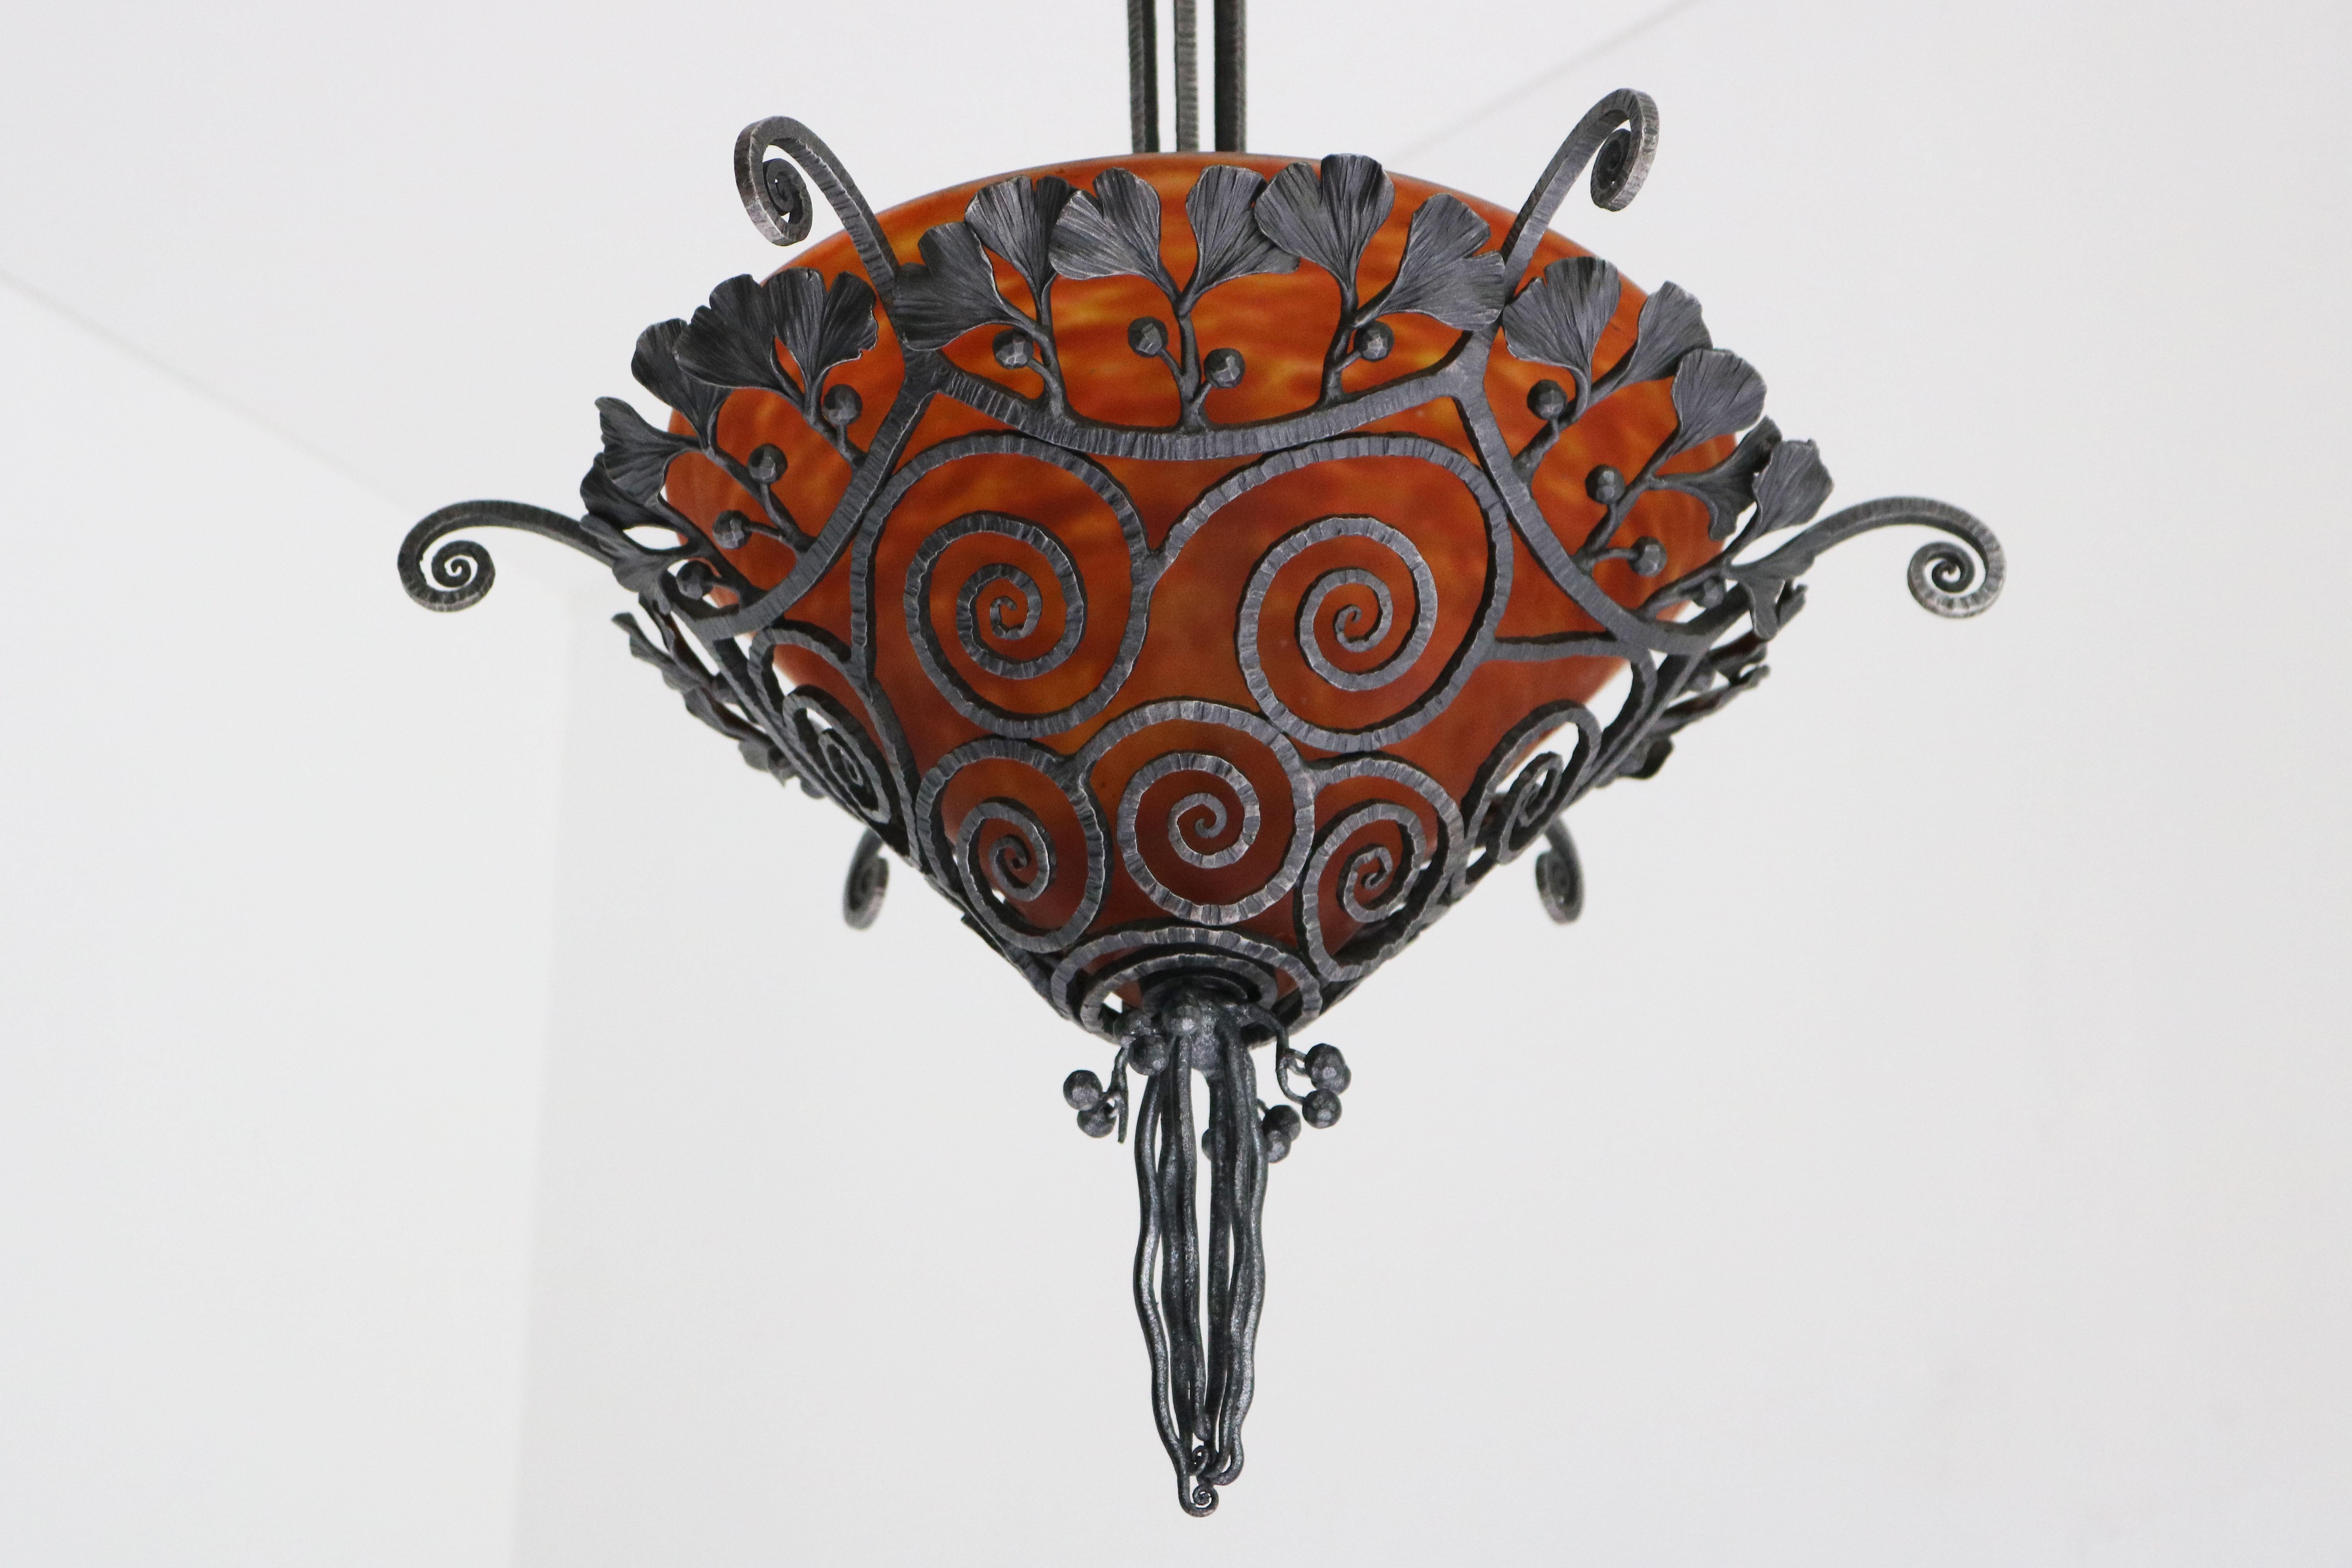 Stylish & Timeless! This breathtaking French art deco chandelier / pendant light by Edgar Brandt & Daum Nancy 1920. 
Incredible craftsmanship in the hand made wrought iron frame showing the favorite design of Edgar brandt: Gingko leaves and berries.